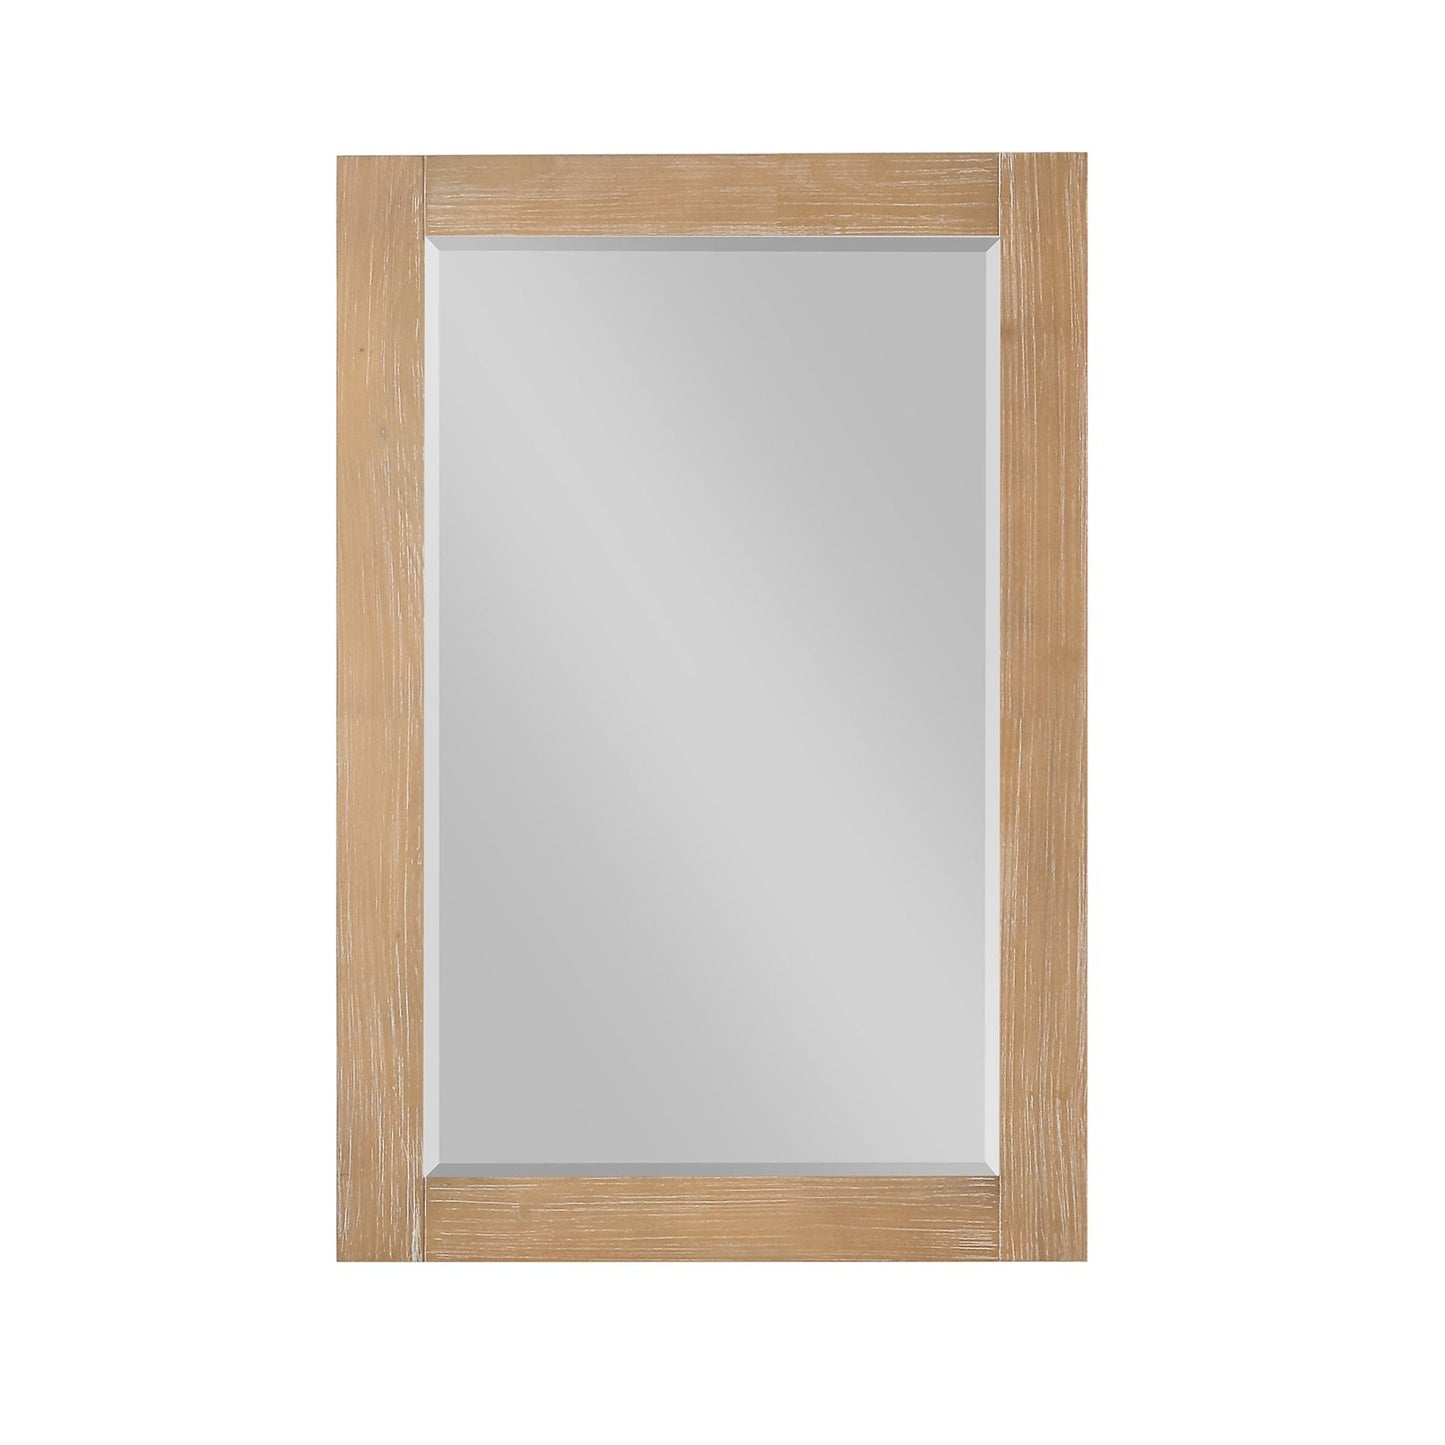 Altair Ivy 24" x 36" Rectangle Weathered Pine Wood Framed Wall-Mounted Mirror